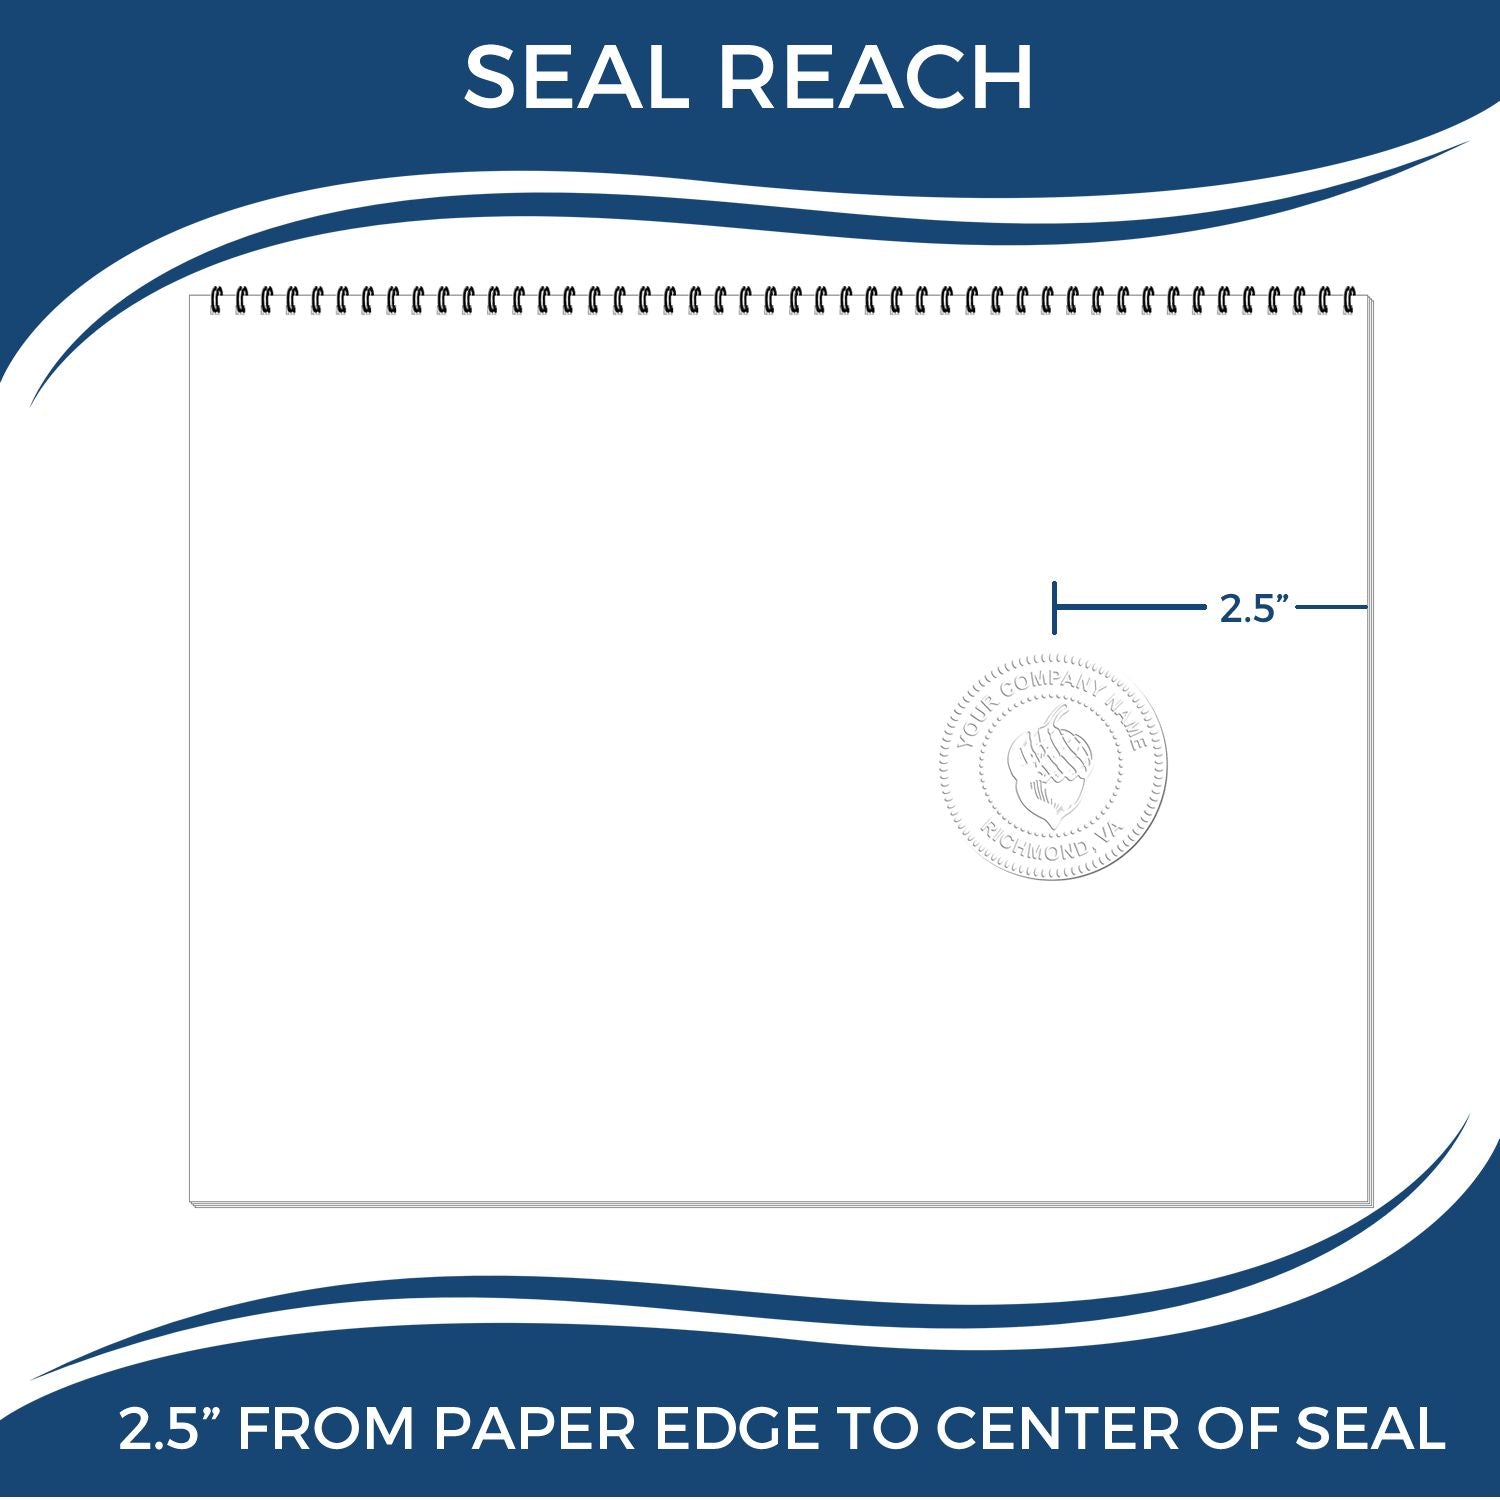 An infographic showing the seal reach which is represented by a ruler and a miniature seal image of the Long Reach Alabama Land Surveyor Seal